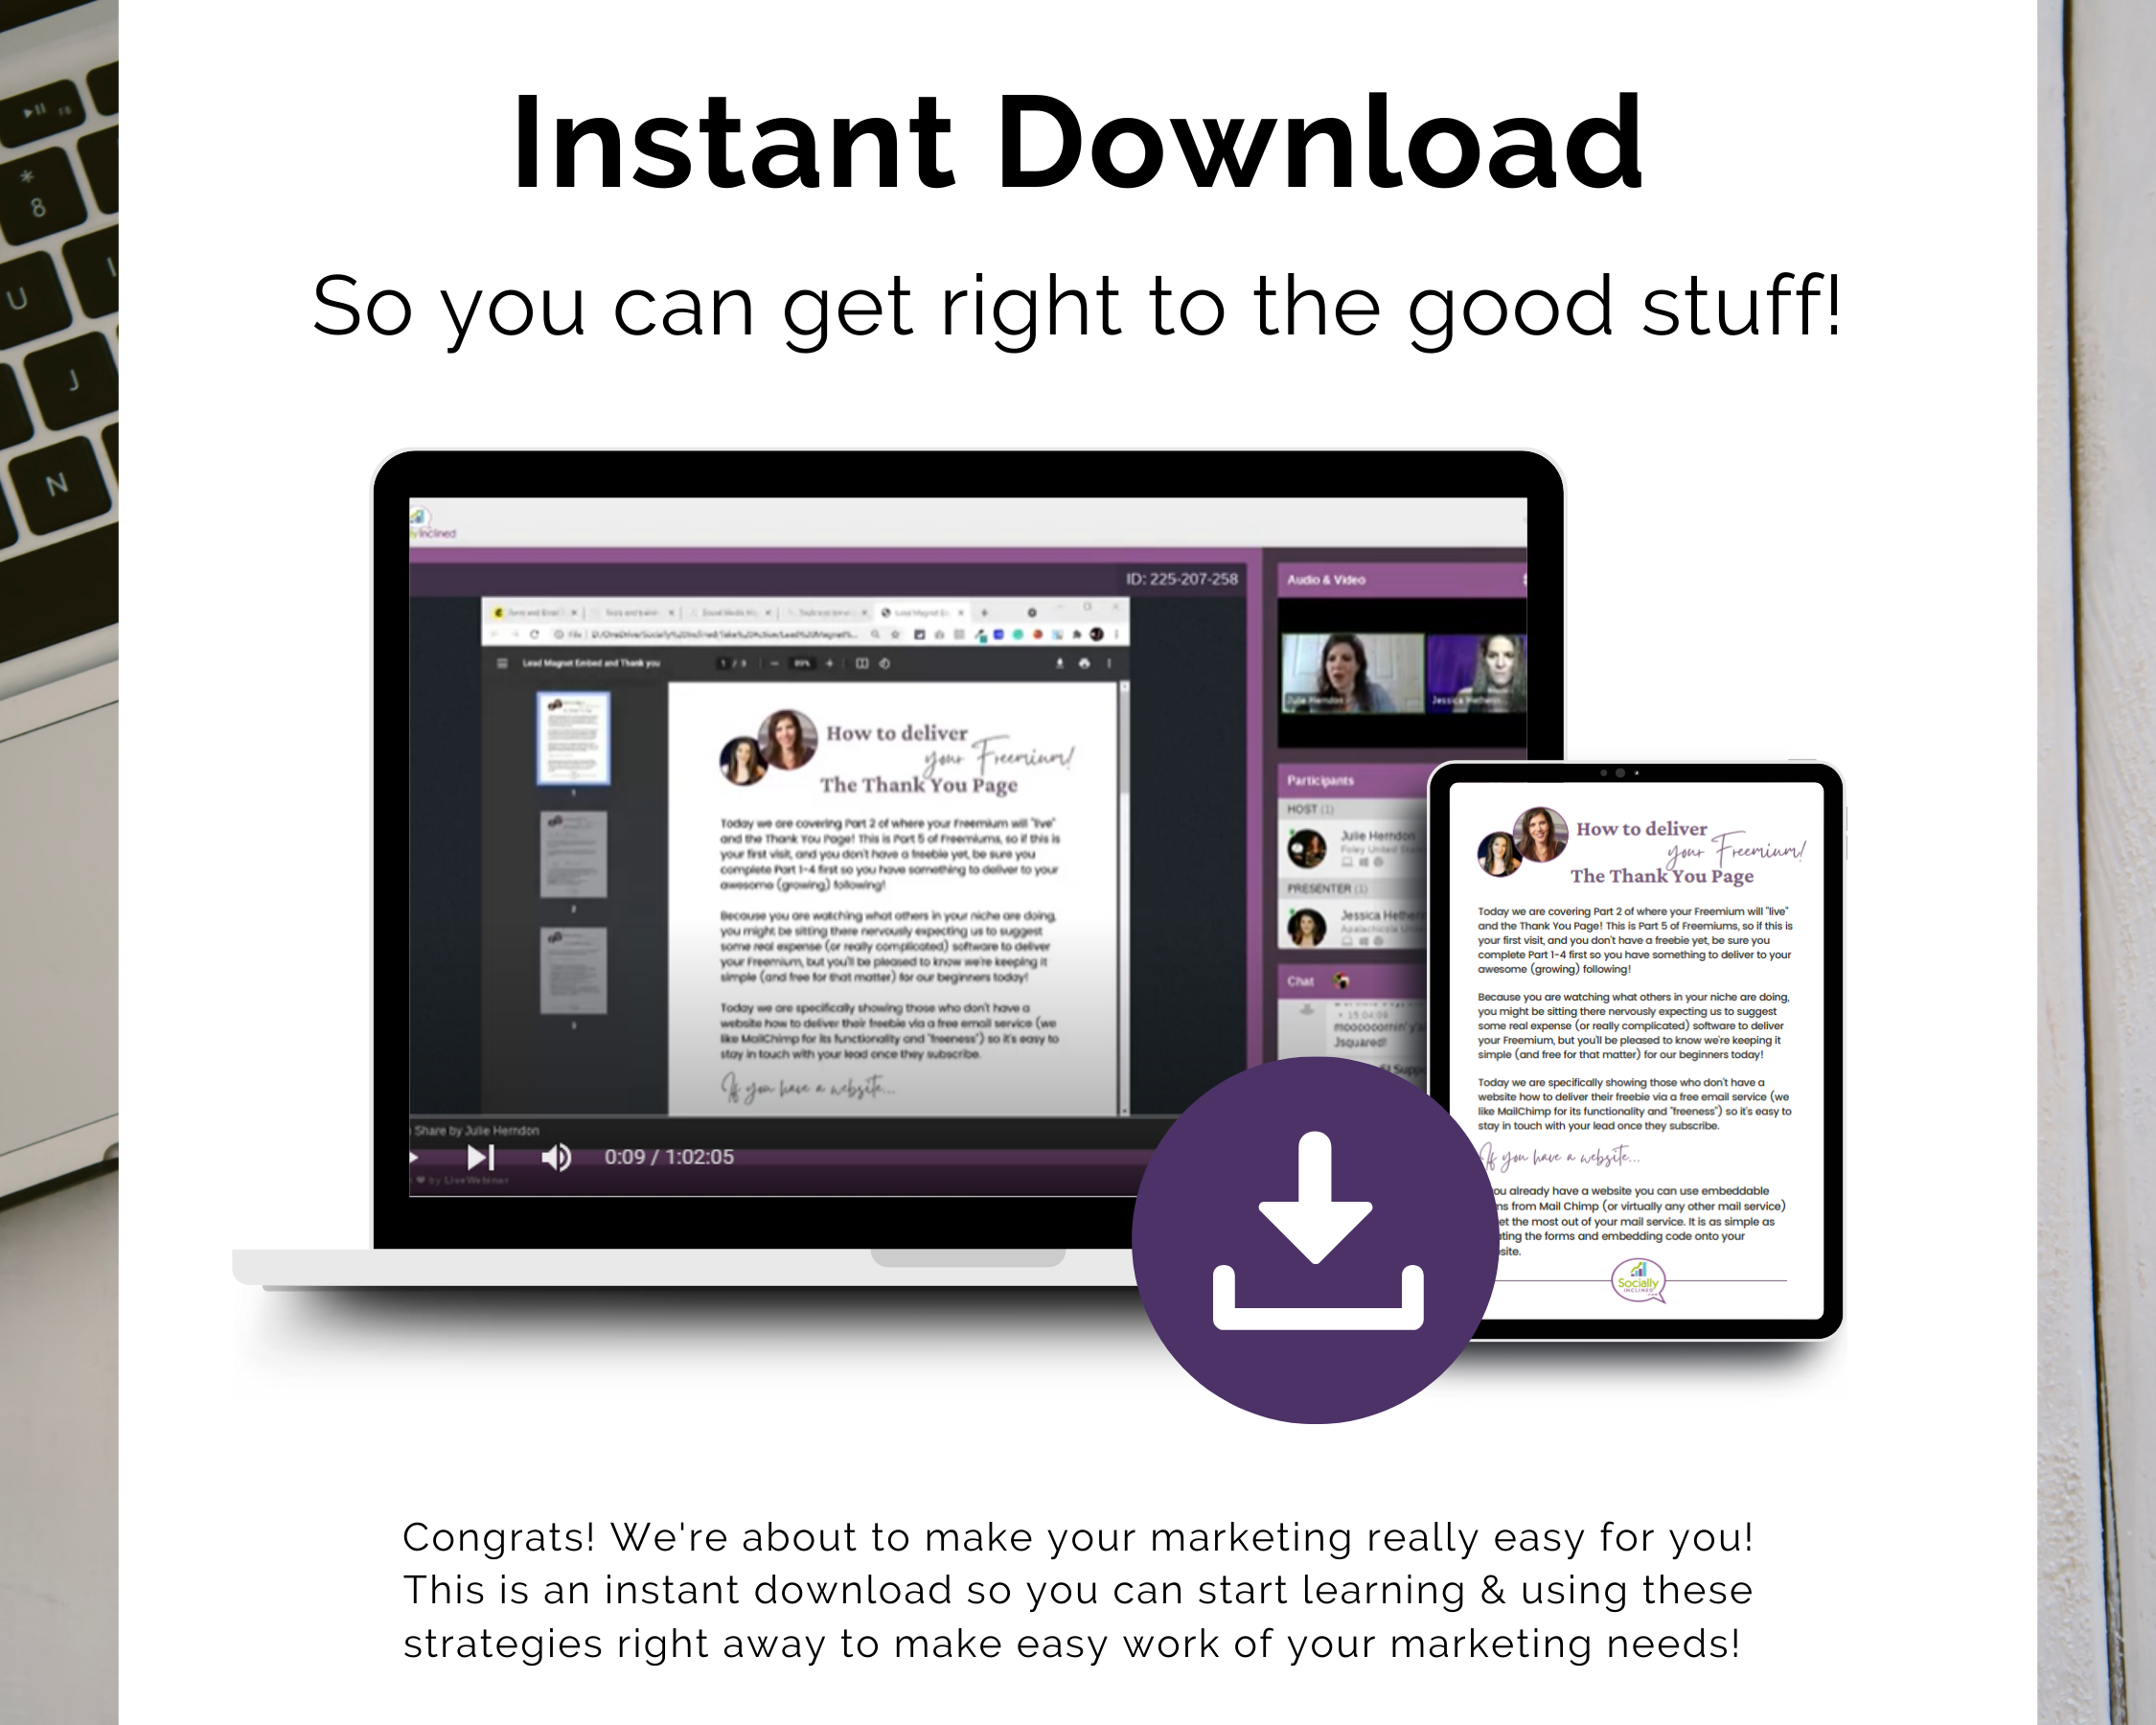 Instant download for immediate access to the TAT - Lead Magnet - Deliver Your Freemium - Part 2 Masterclass created by Get Socially Inclined.